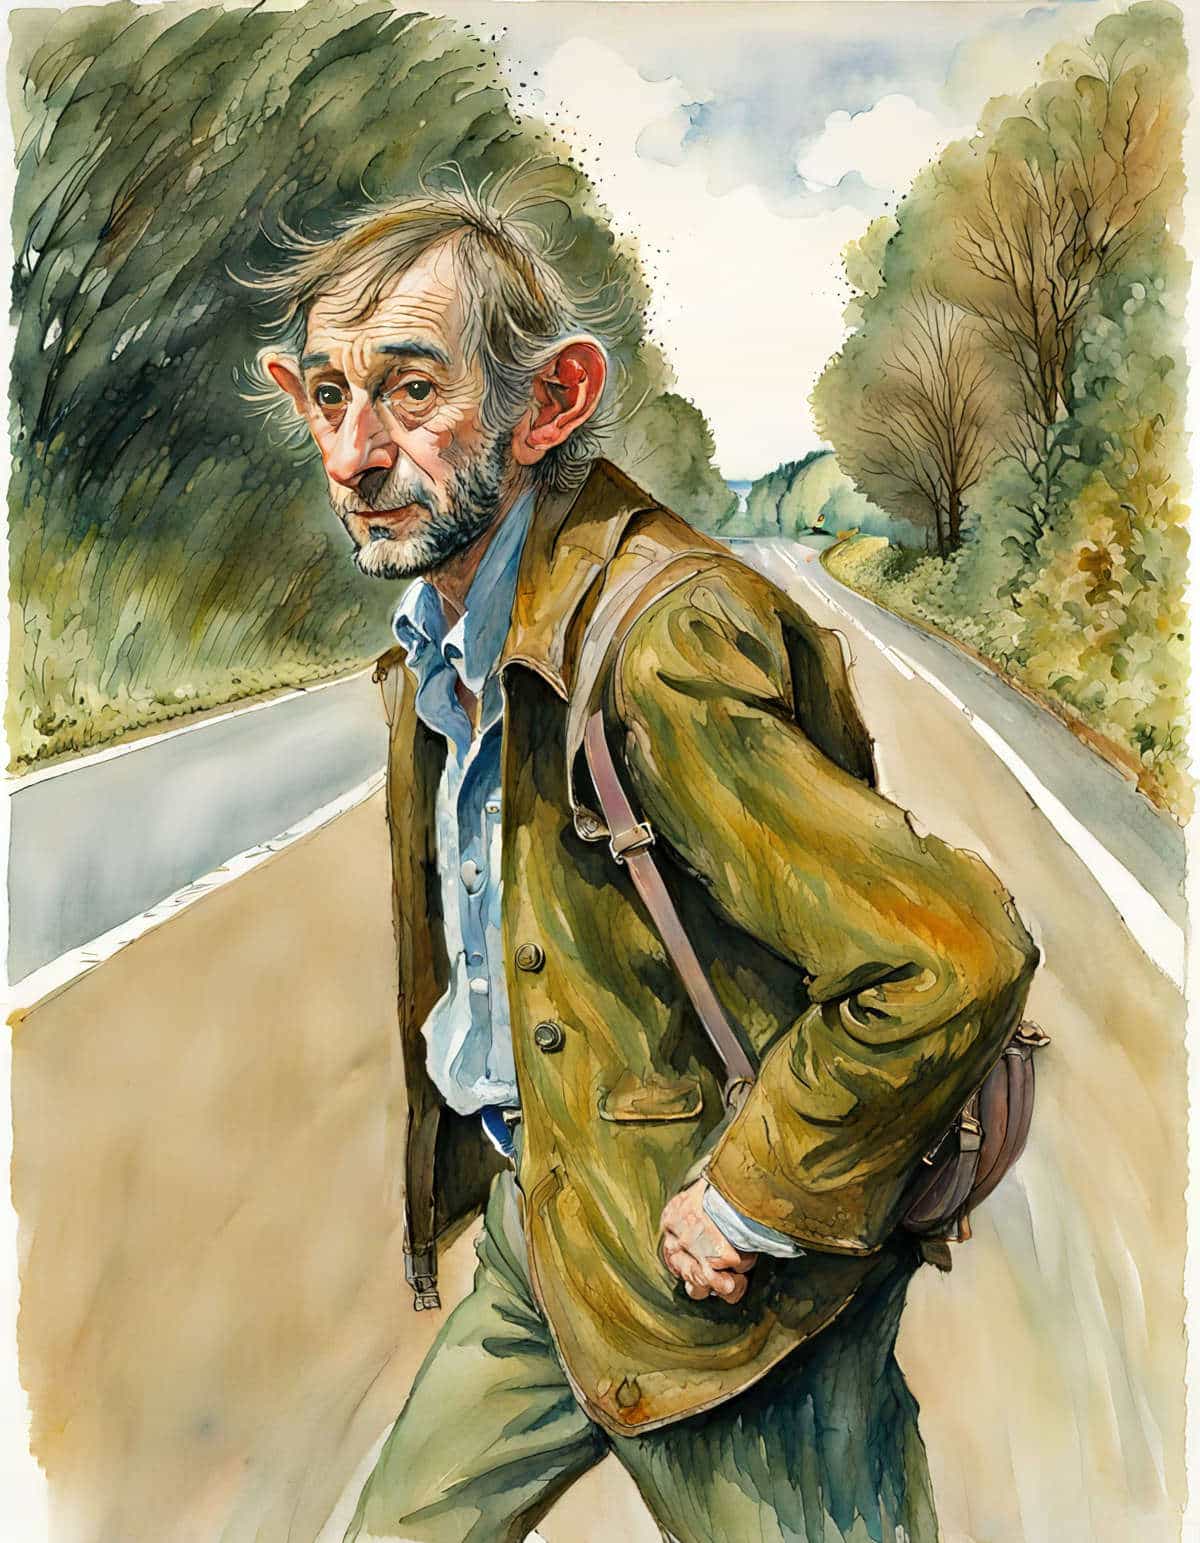 The Hitch-hiker by Roald Dahl Short Story Analysis